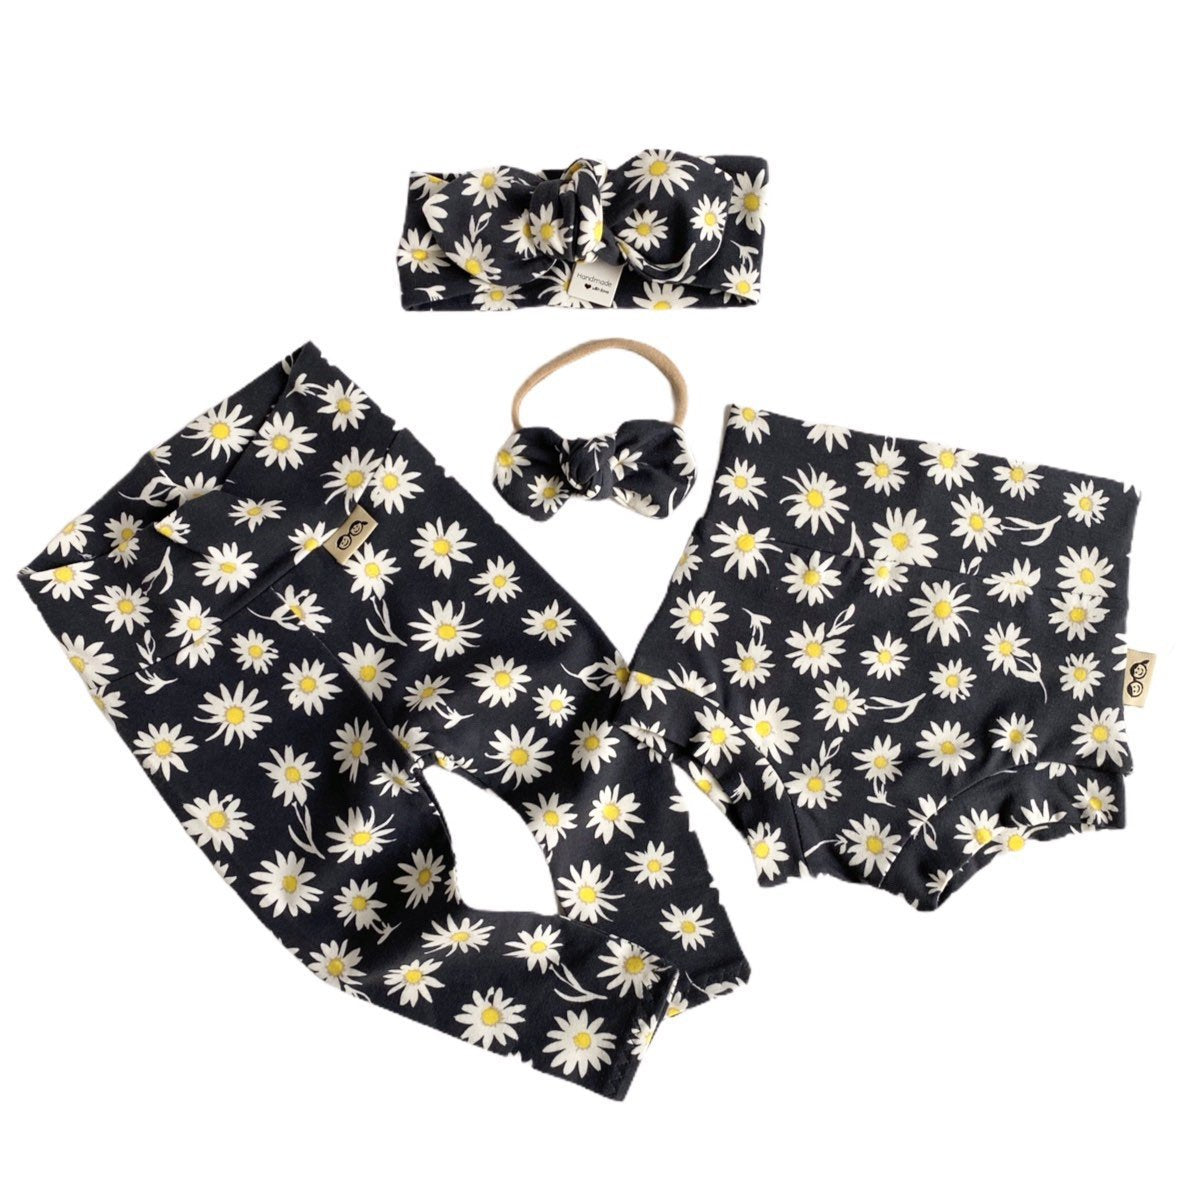 Daisies on Off Black Leggings and/or Headbands